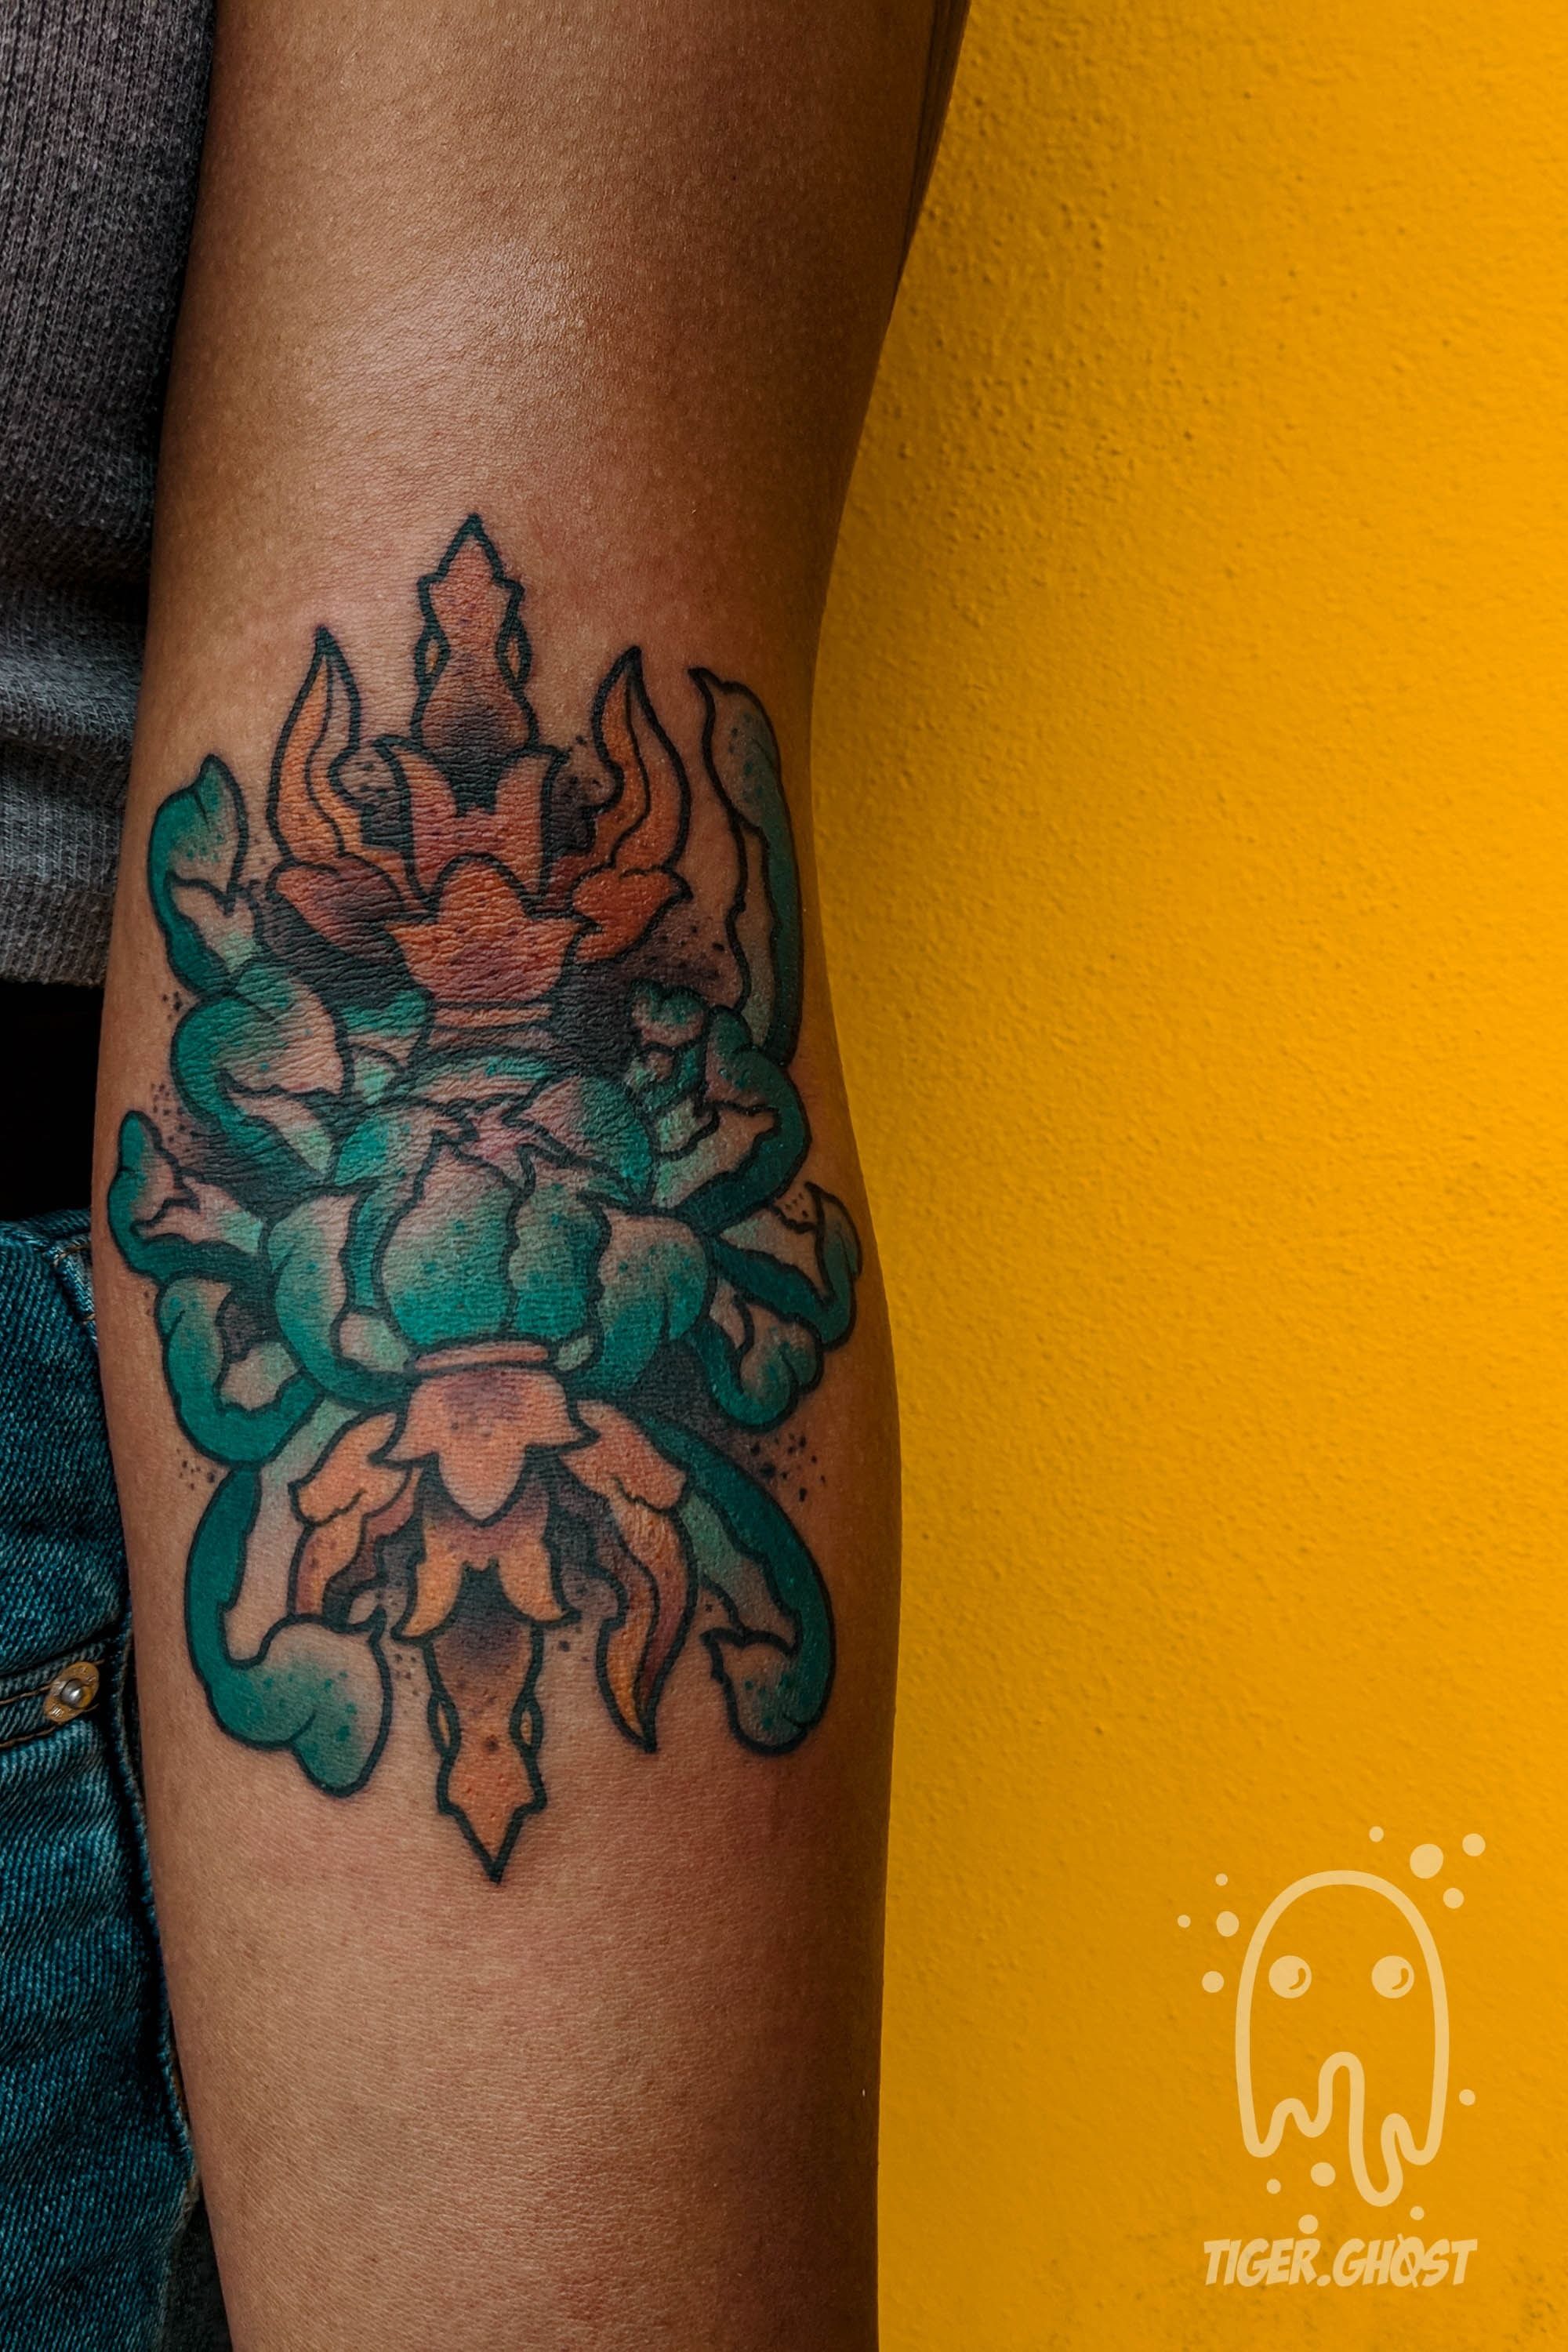 Tattoo uploaded by Tom - Robots x Raccoons • Thunderbolt (vajra) and  chrysanthemum on dark skin on the ditch of the elbow • Tattoodo